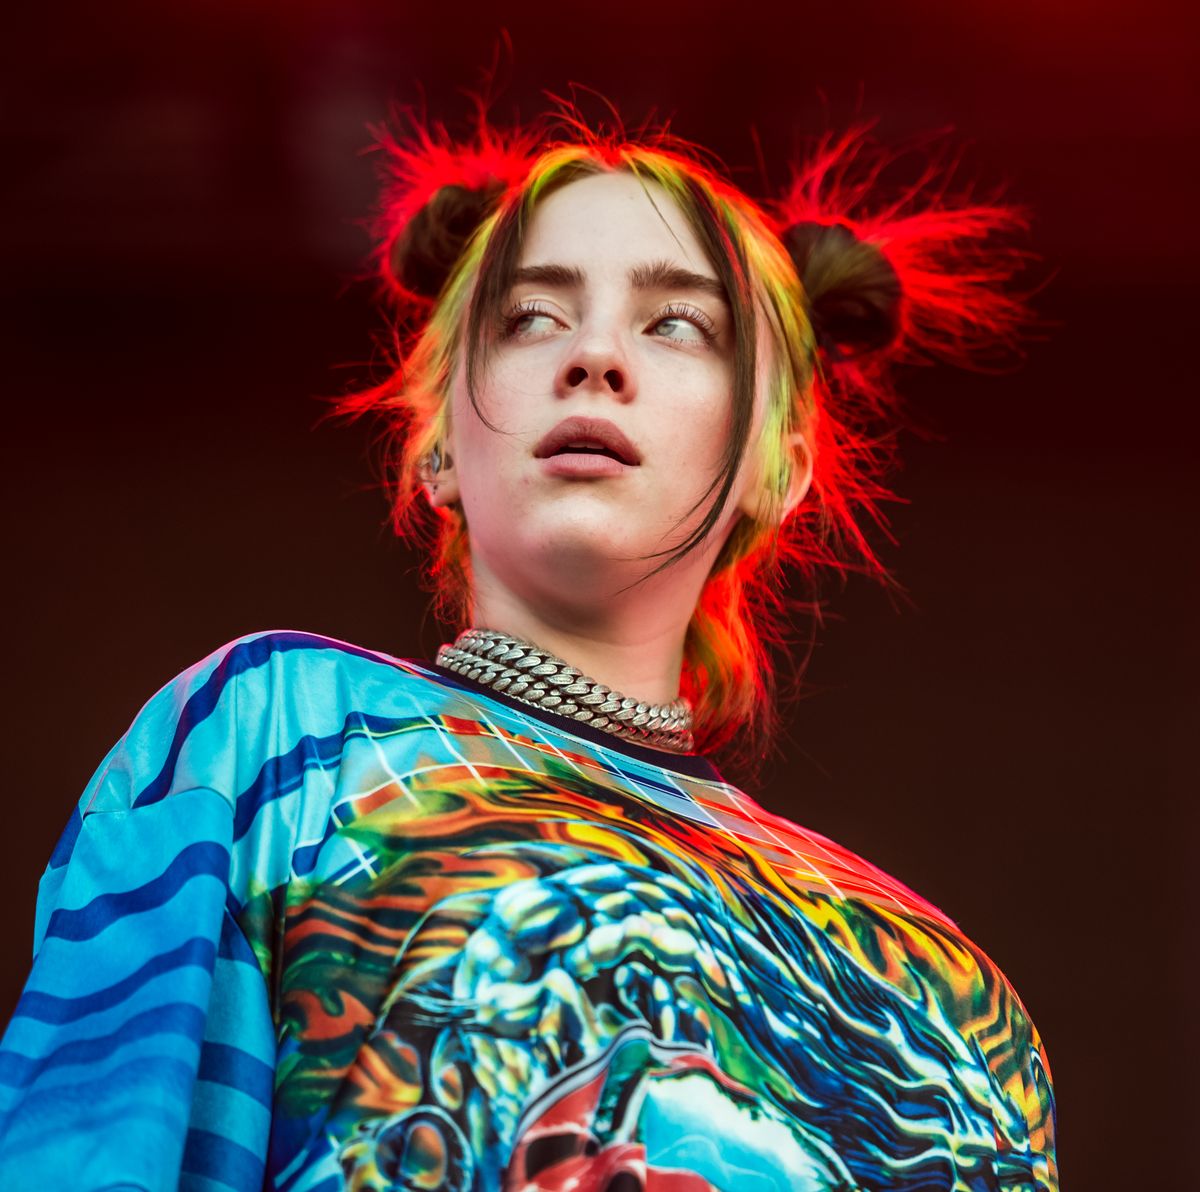 A Billie Eilish Documentary Is Reportedly Coming to Apple TV+ Eilish When We All Fall Asleep, Where Do We Go Documentary